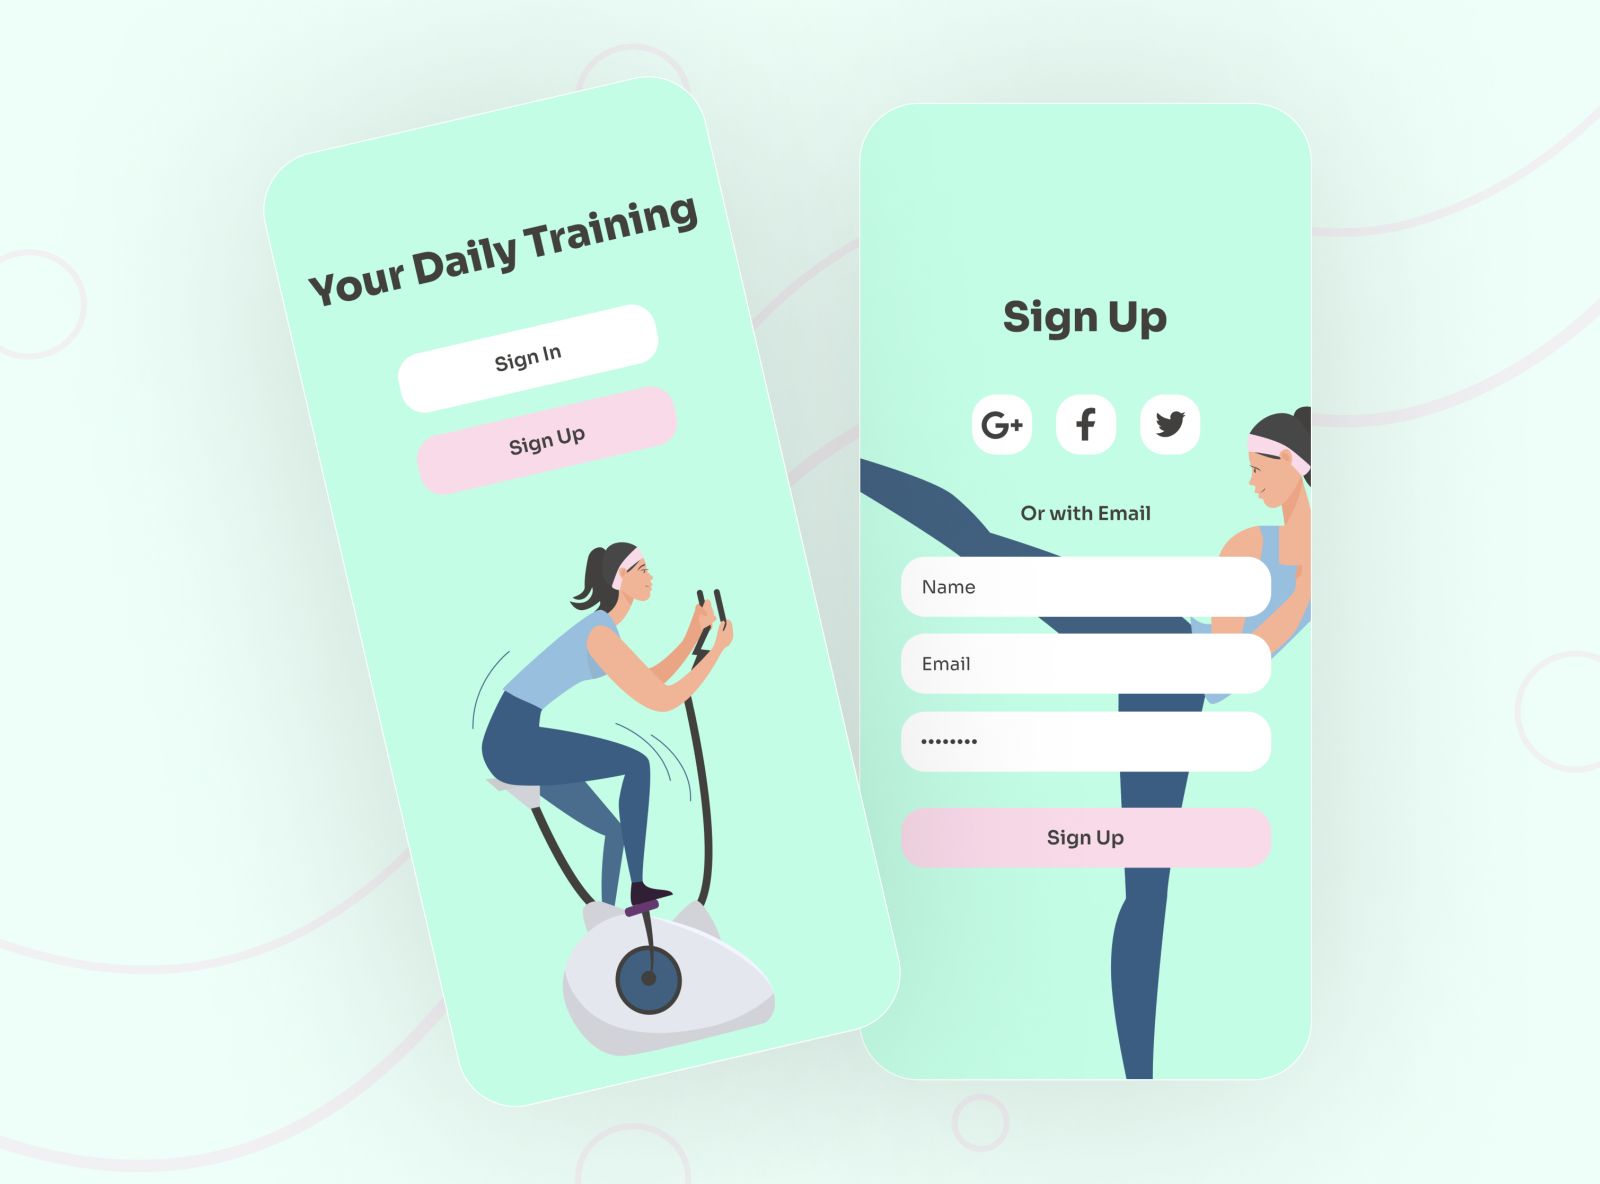 User Registration ensures secure access, while Profile features allow individuals to input their fitness goals, track progress, and customize workout preferences. 